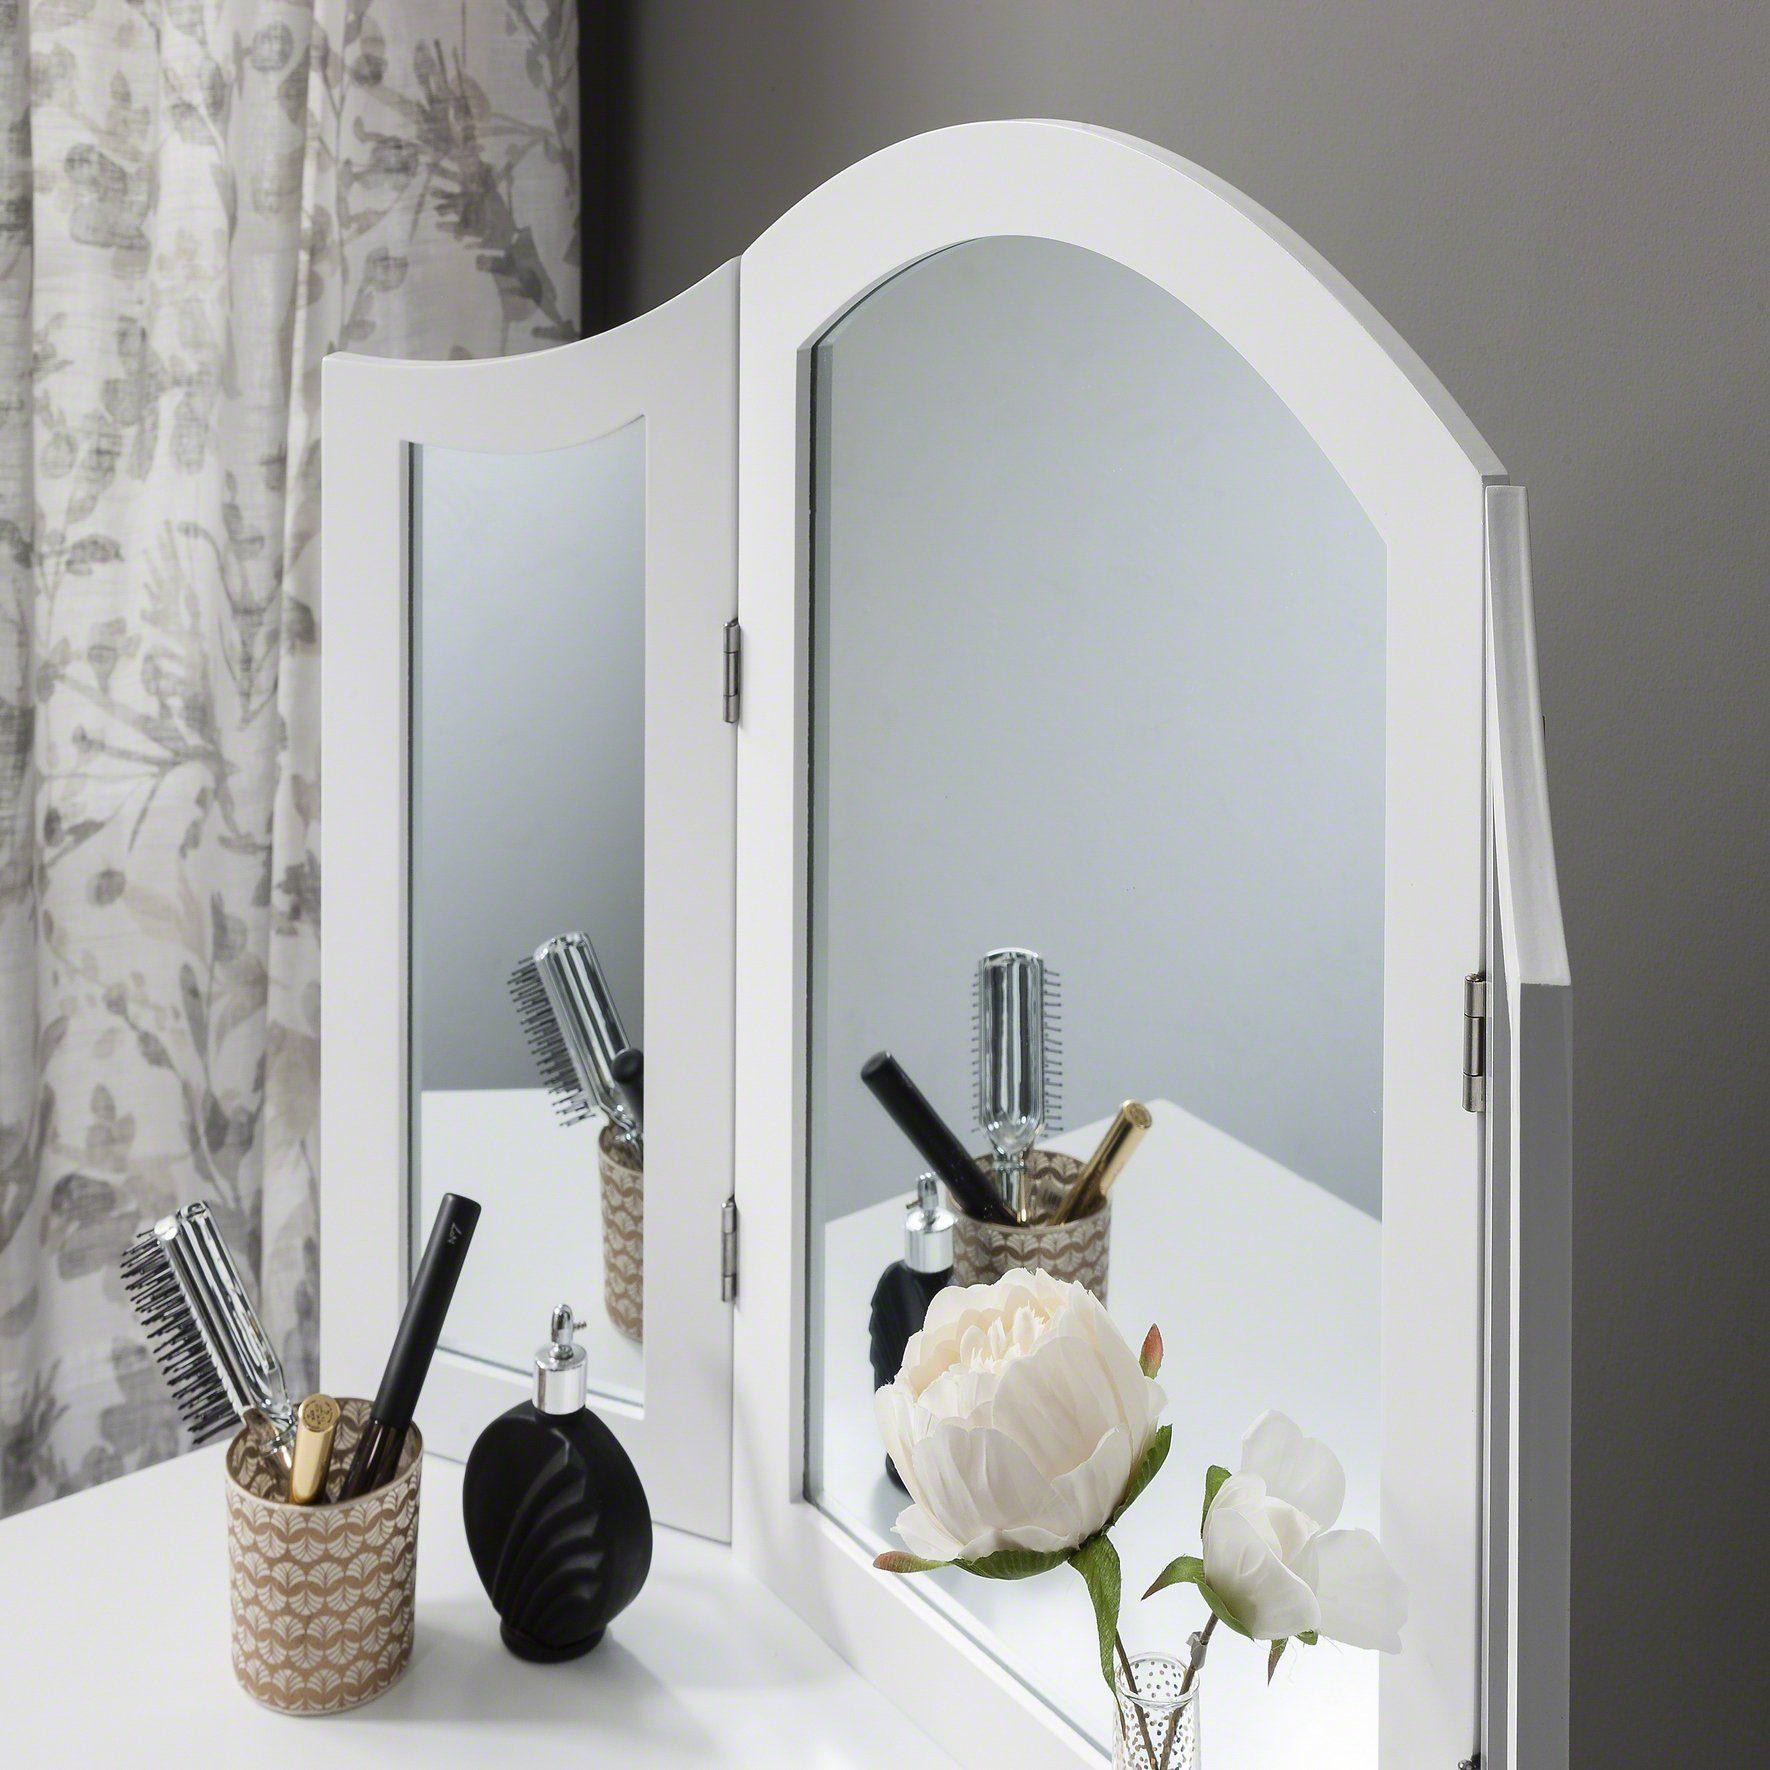 Sienna Dressing Table, Stool & Mirror Set - White Painted - In Stock Date - 2nd June 2020 - Laura James